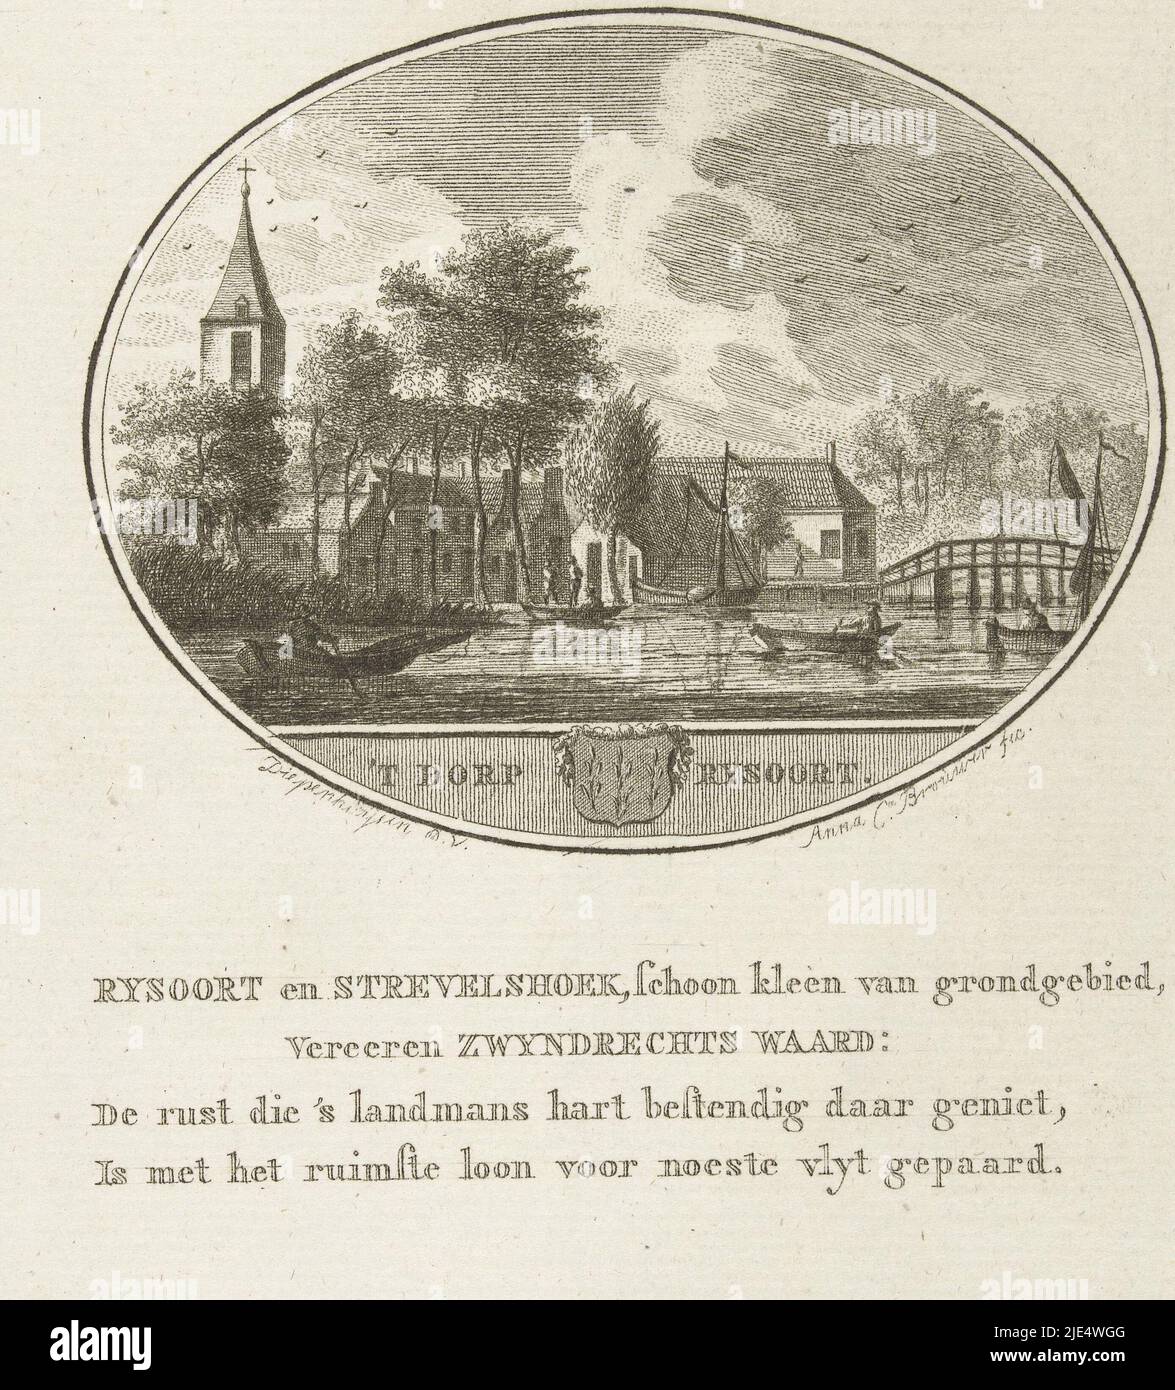 View of the village Rijsoord 't Dorp Rysoort, print maker: Anna Catharina Brouwer, (mentioned on object), intermediary draughtsman: Johannes van Diepenhuijsen, (mentioned on object), Amsterdam, (possibly), 1791 - 1793, paper, etching, h 220 mm × w 140 mm Stock Photo